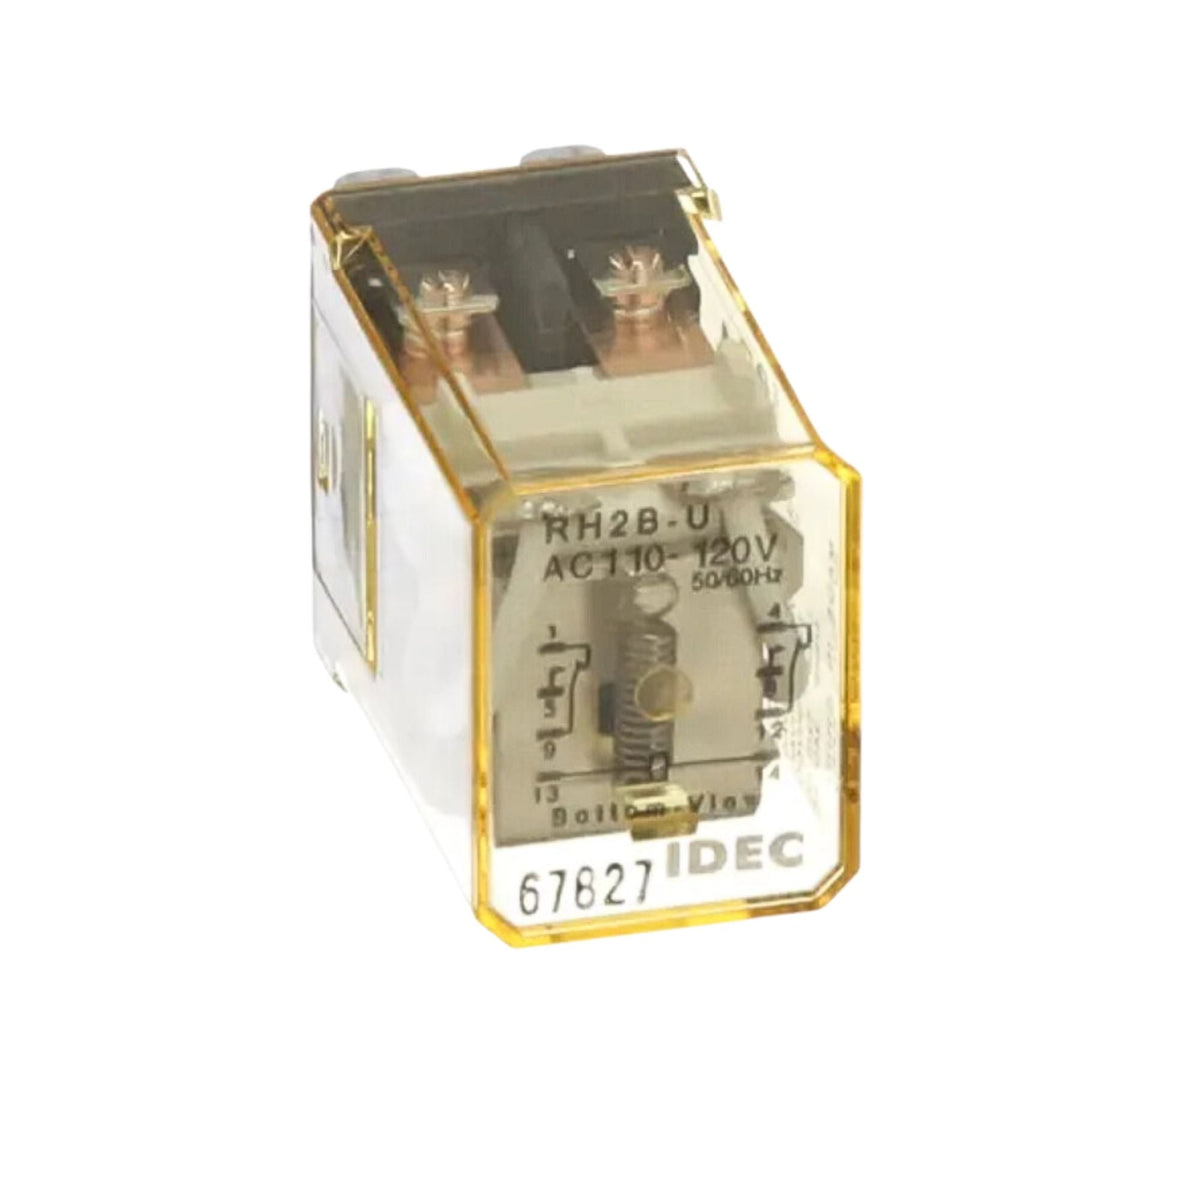 Plug-In Relay | RH2B-UAC110-120V used on Idec product line - front view